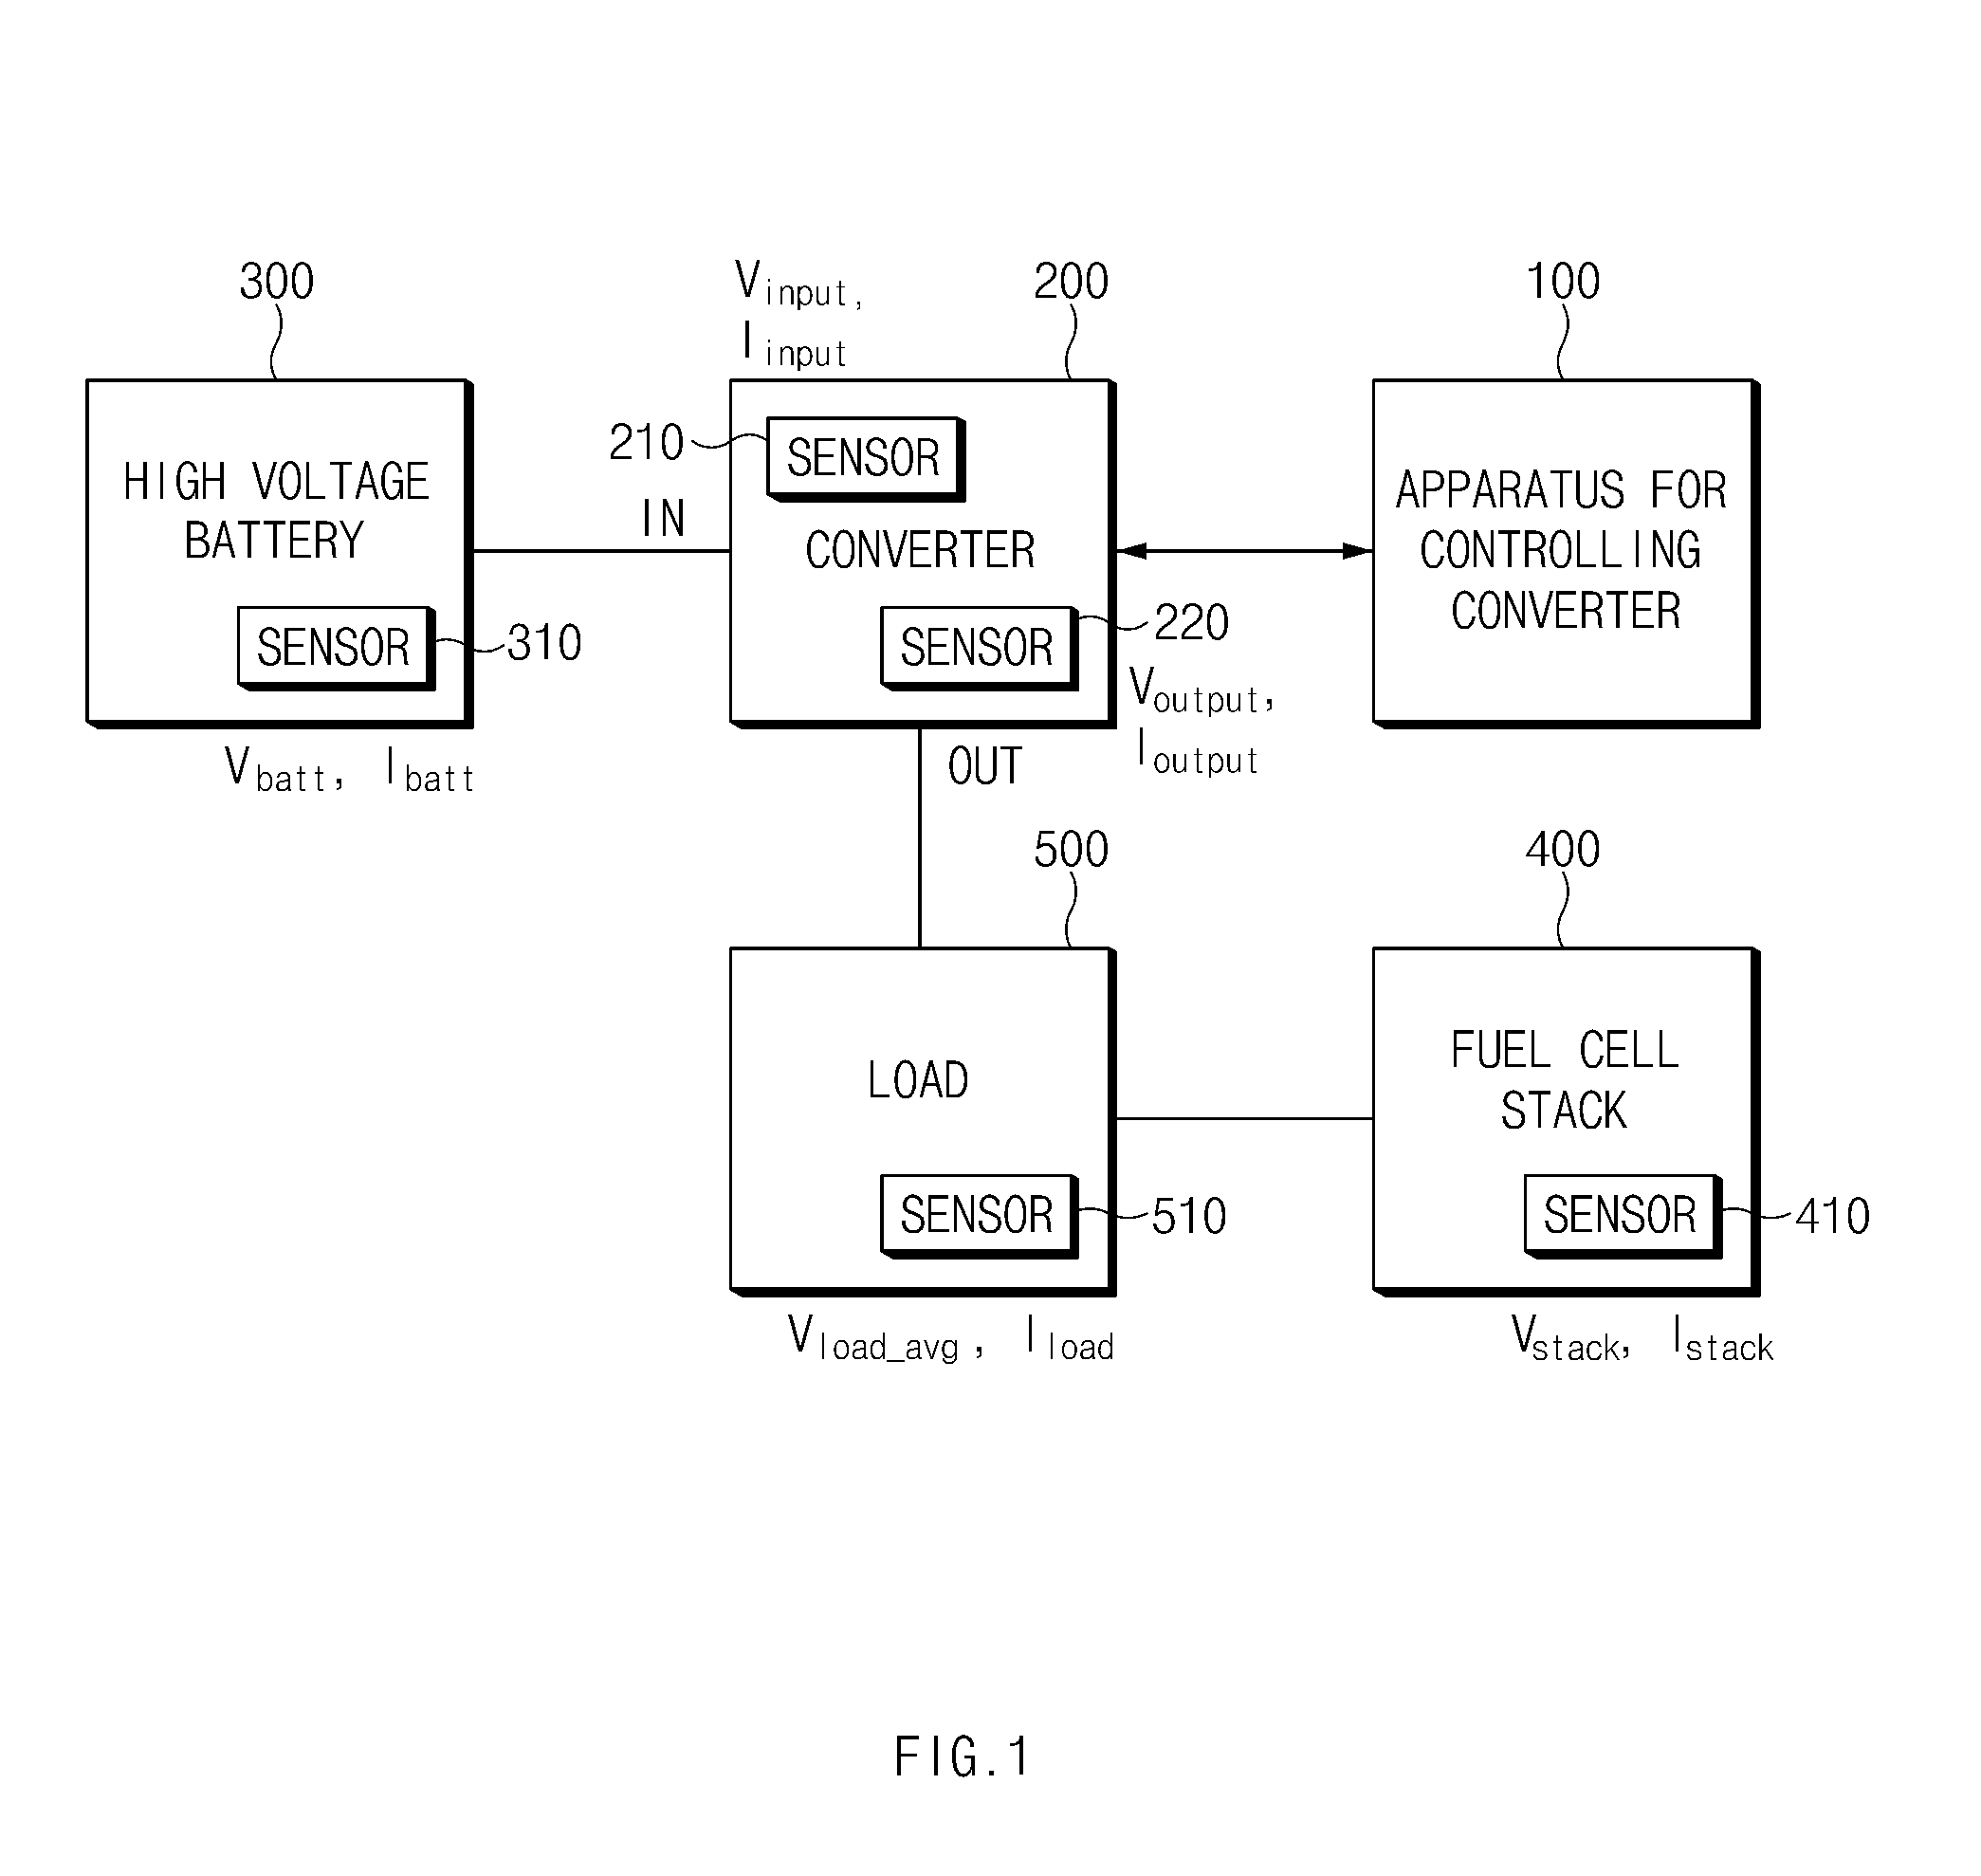 Apparatus and method for controlling converter